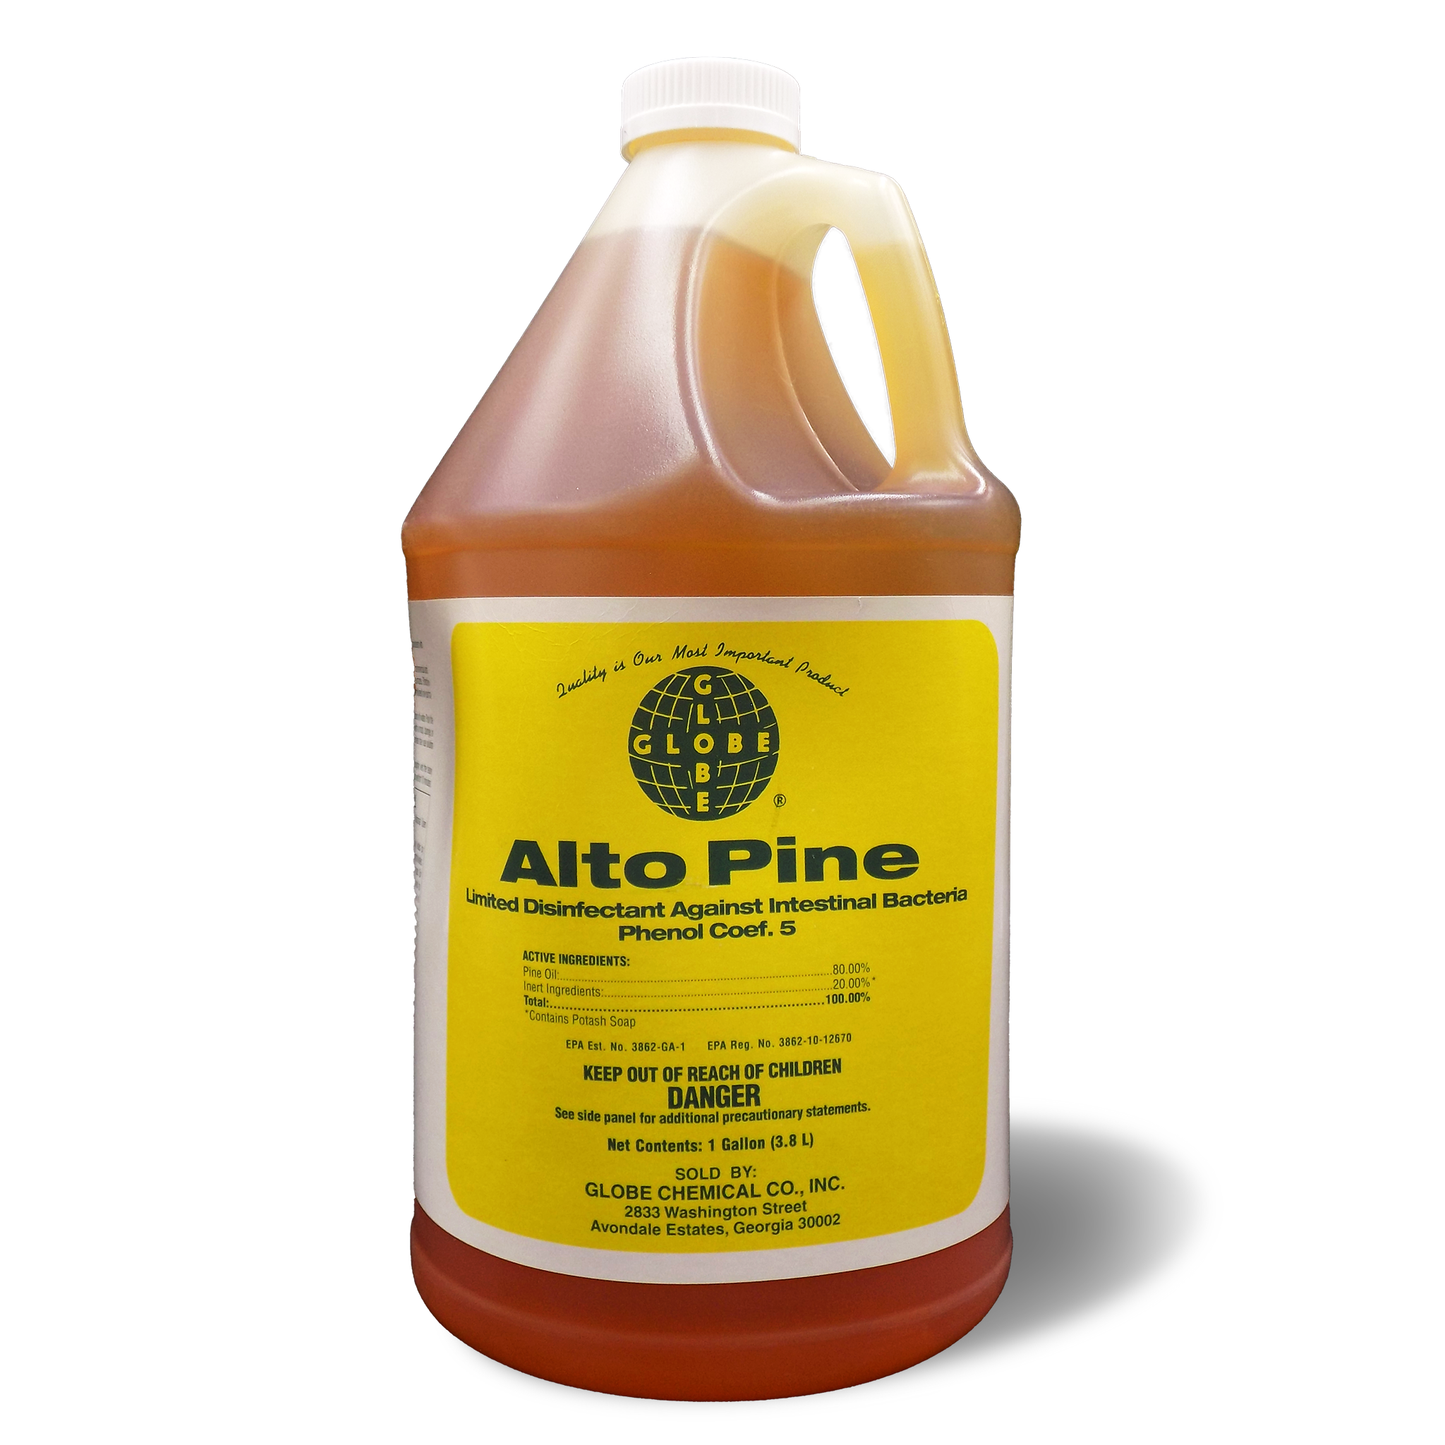 Alto Pine, Limited Disinfectant Against Intestinal Bacteria Phenol Coef. 5